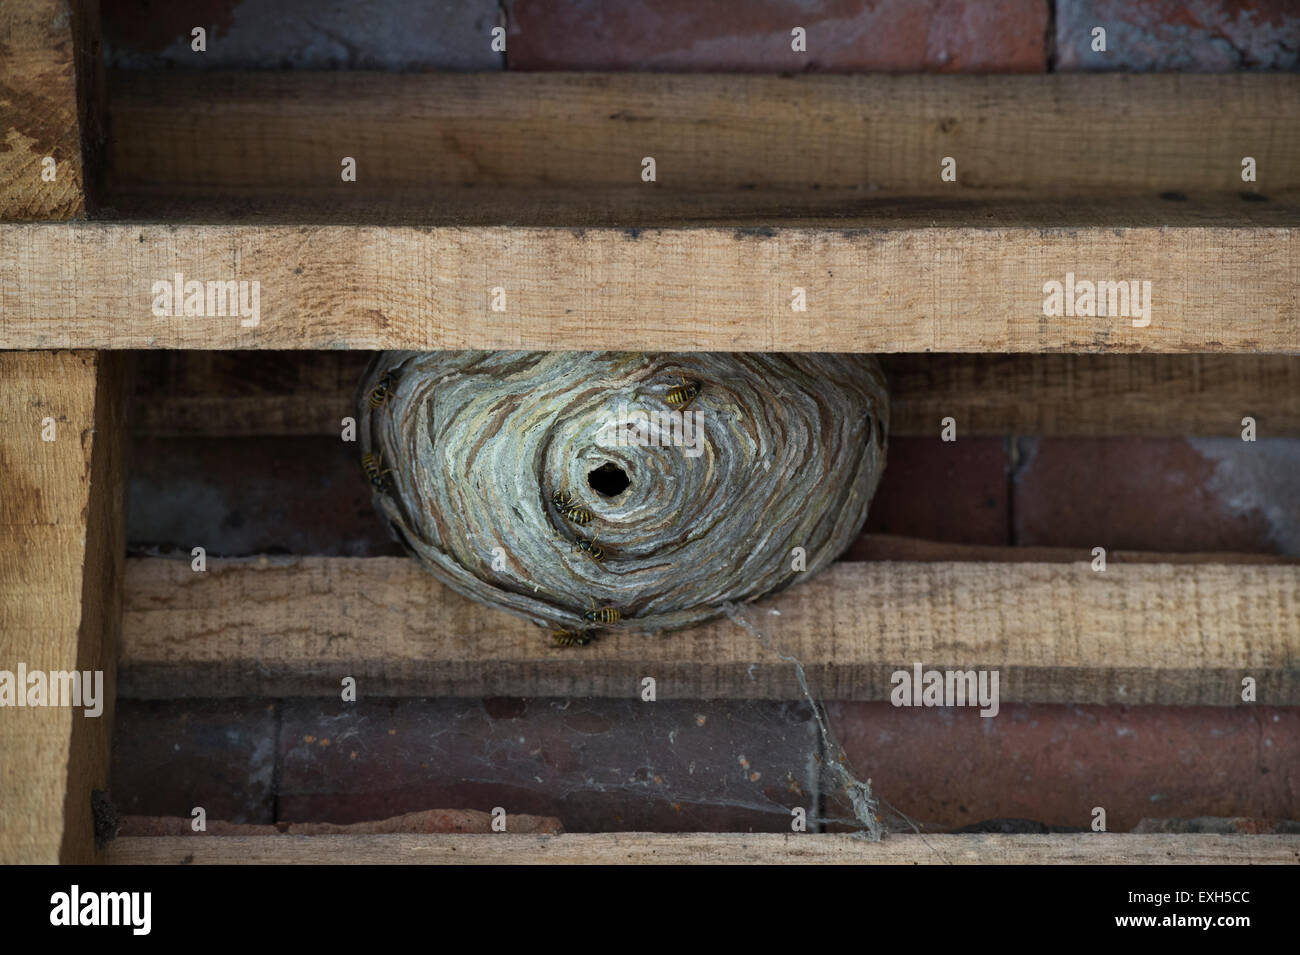 Vespula germanica. Wasp Nest in the roof rafters of an out building. UK Stock Photo